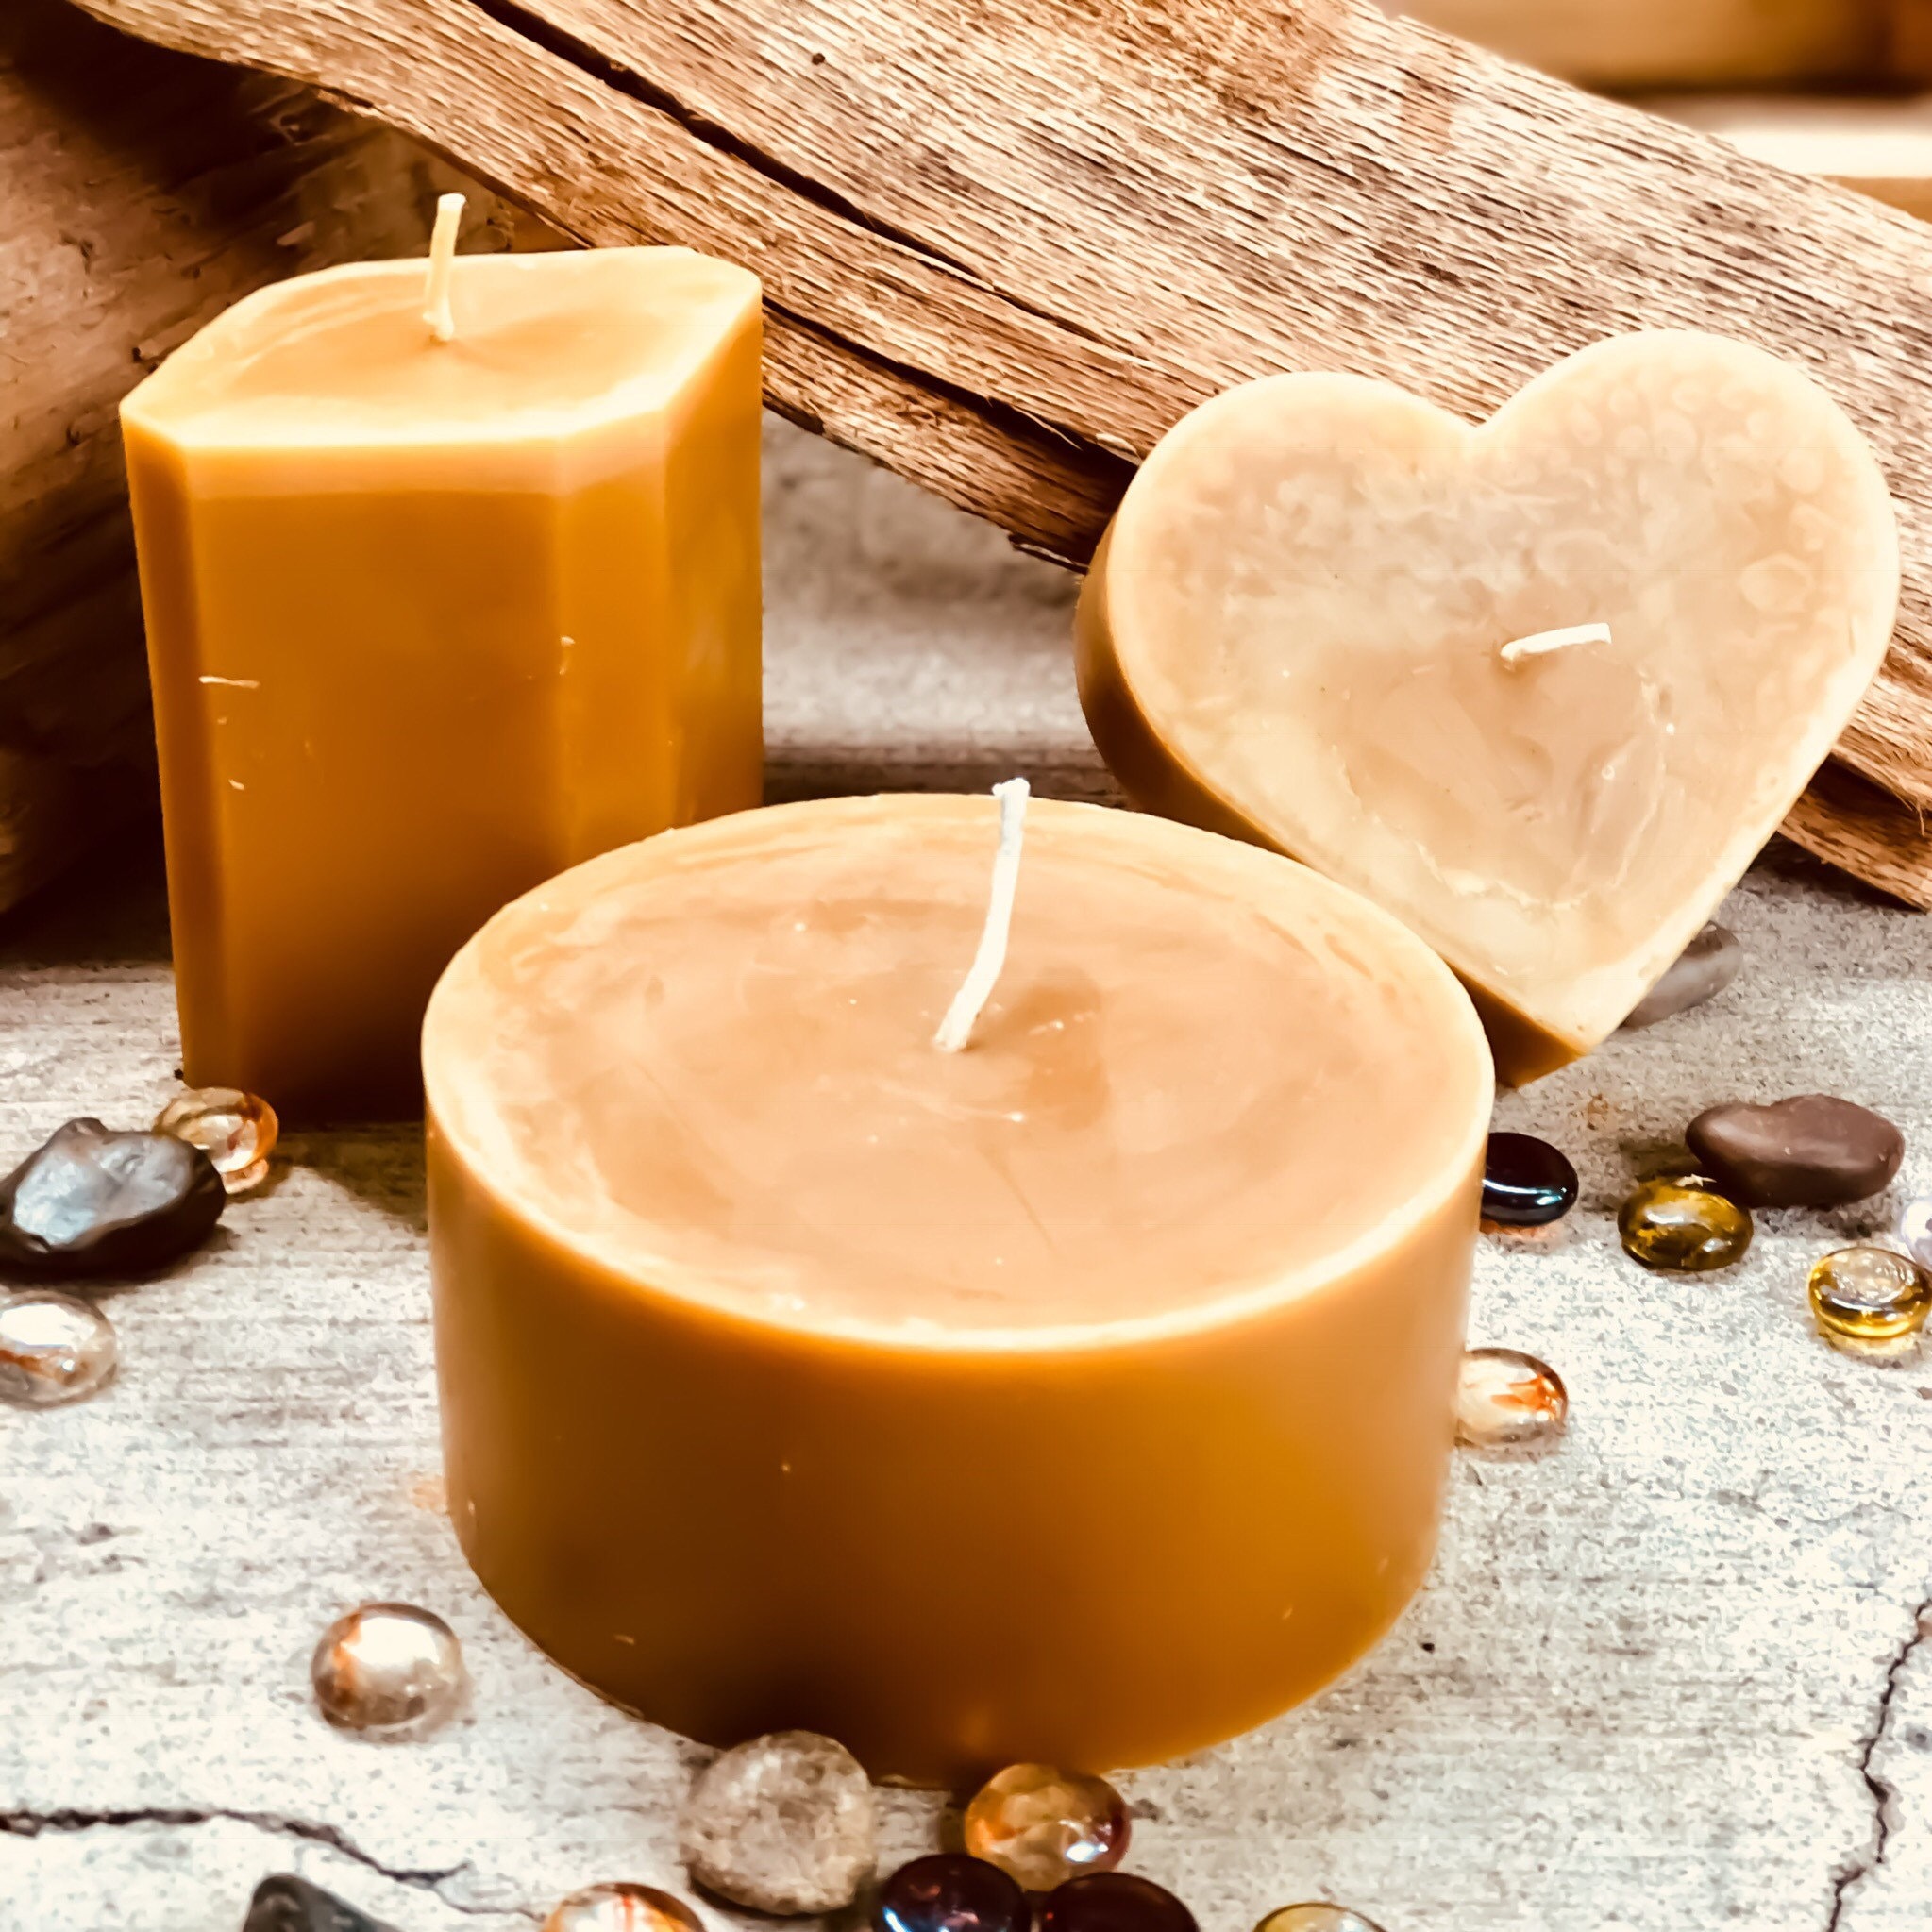 100% Pure Beeswax Pillar Candle-large 5.5inch wide Beeswax Pillar Candle- Pure Organic Beeswax Candlex-extra large beeswax pillar candle